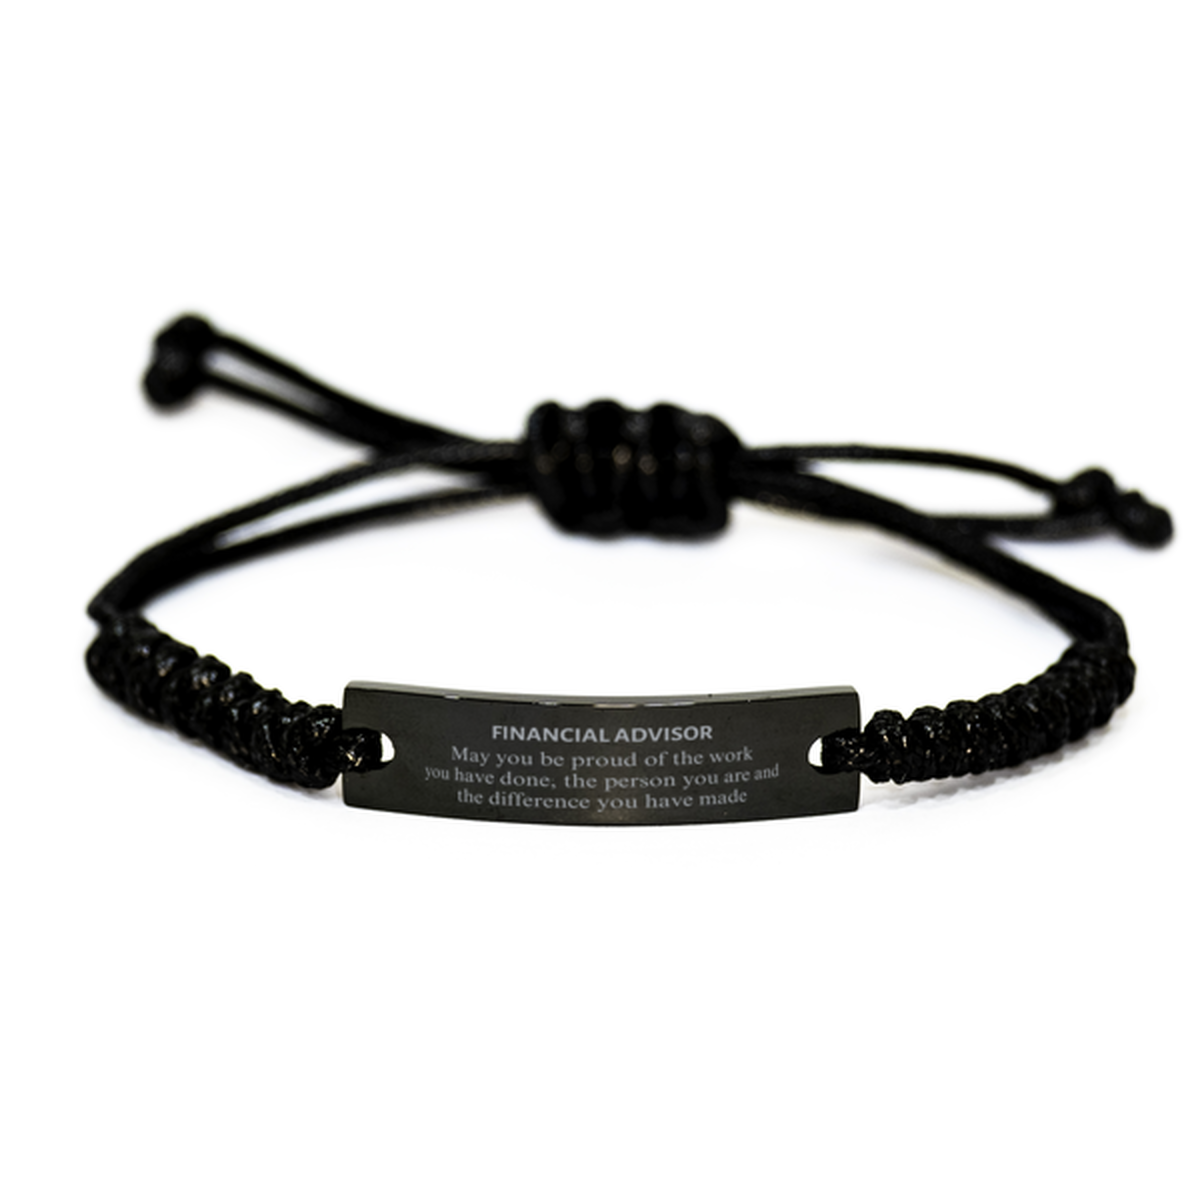 Financial Advisor May you be proud of the work you have done, Retirement Financial Advisor Black Rope Bracelet for Colleague Appreciation Gifts Amazing for Financial Advisor